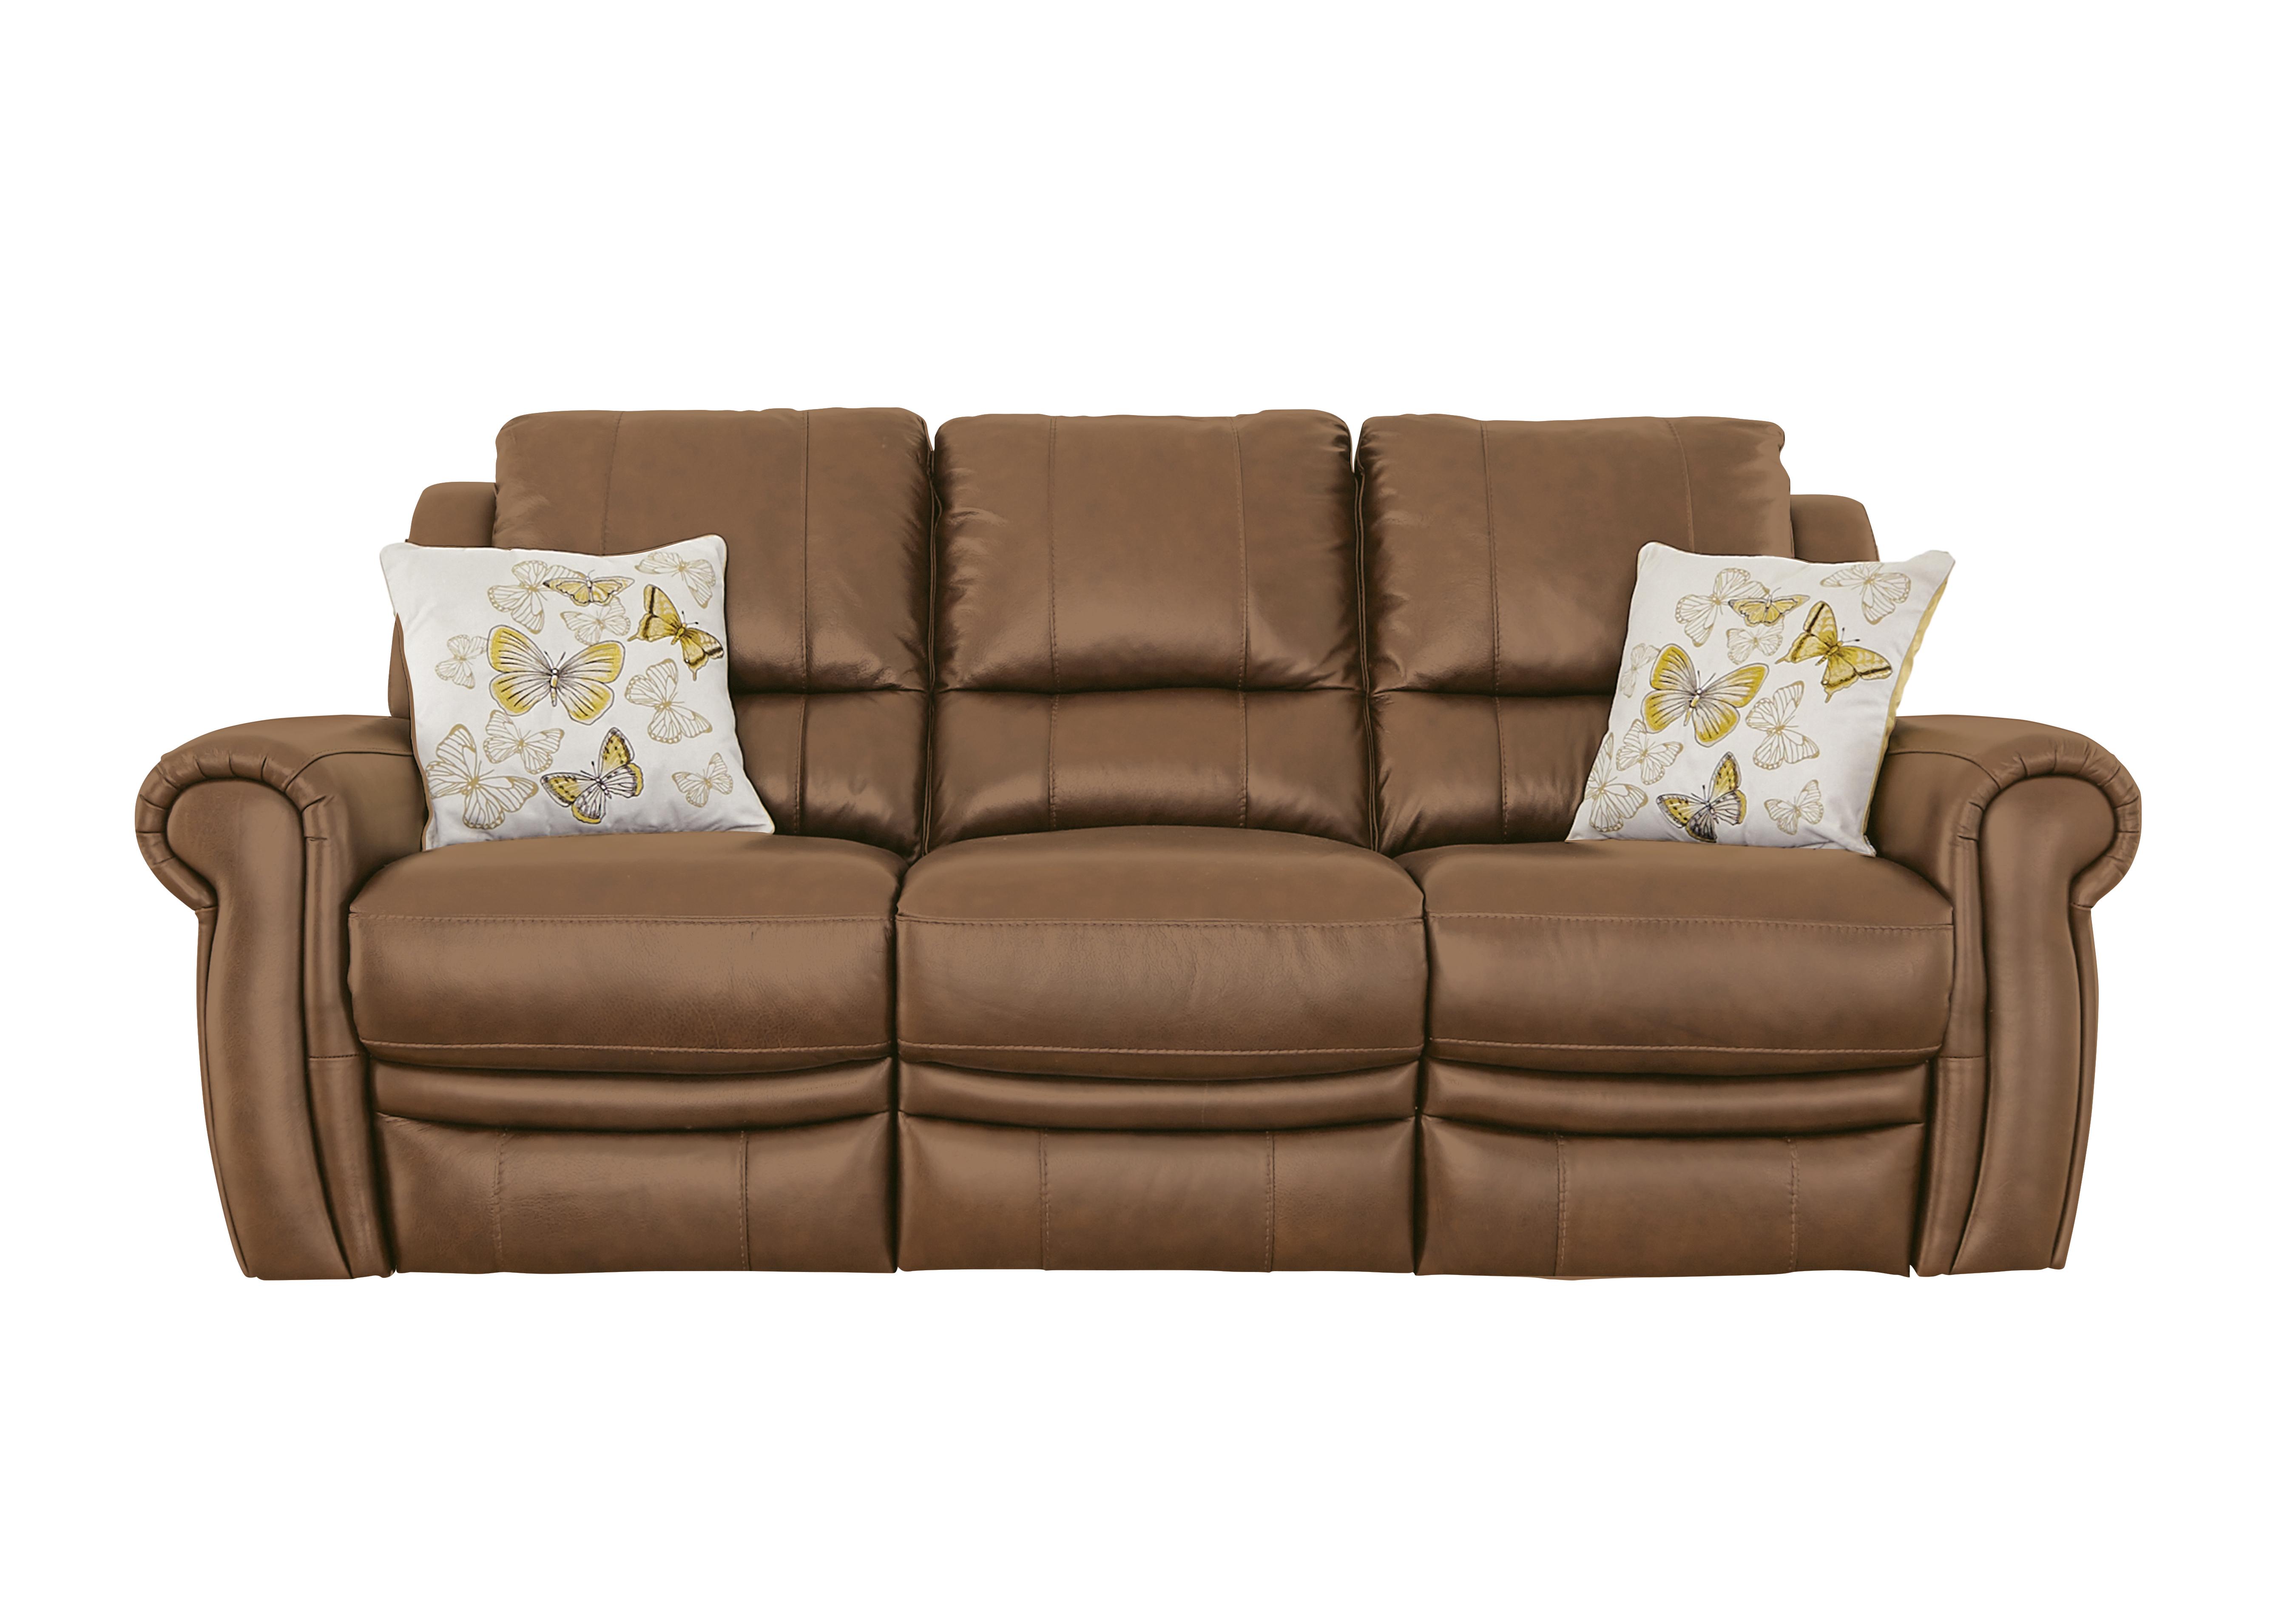 Arizona Leather Manual Recliner 3 Seater Sofa Only One Left